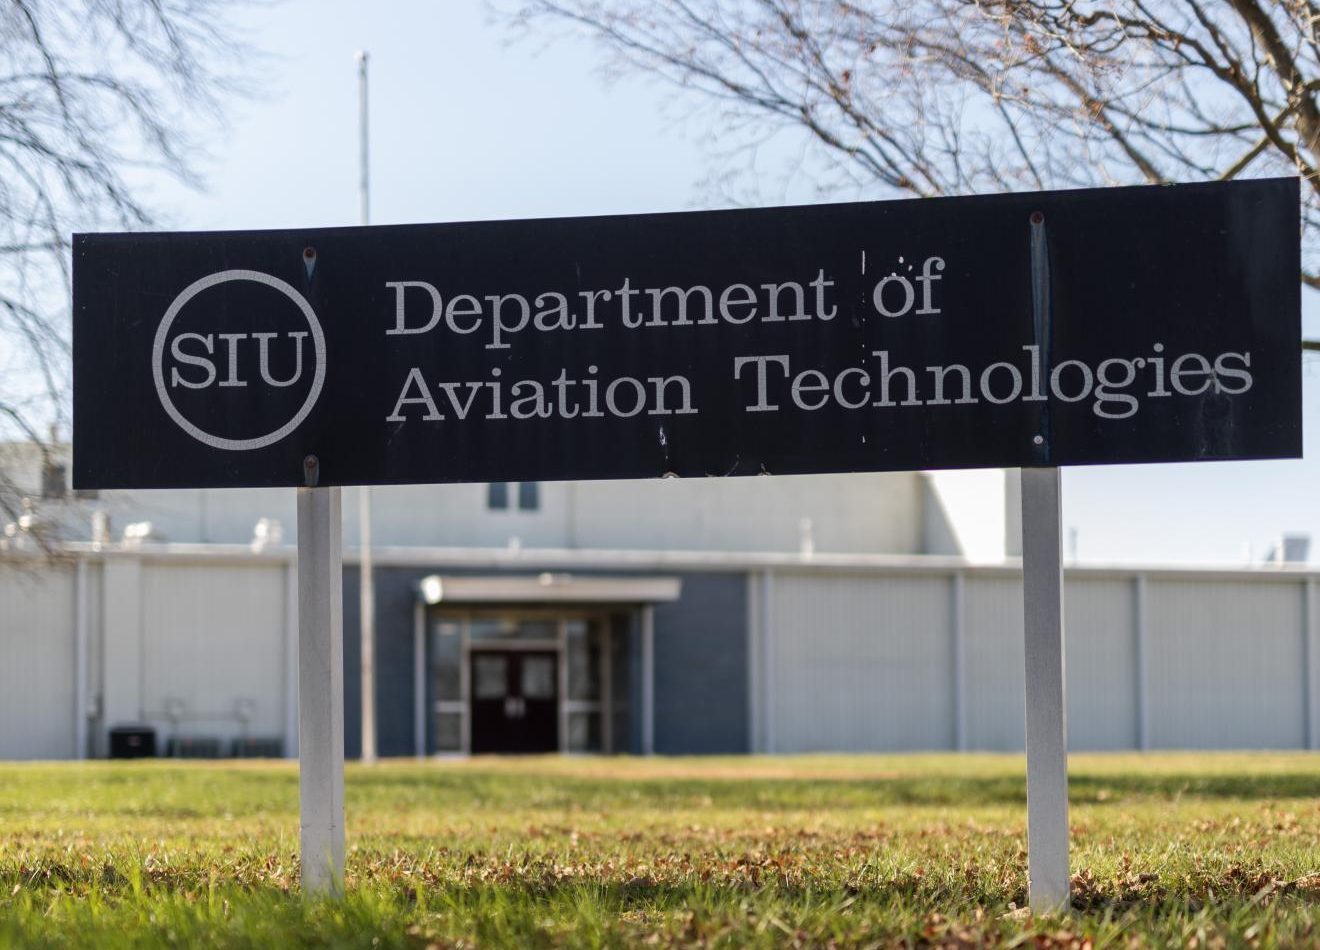 Set up “to fail:” Air Traffic Control shortage casts clouds over SIU aviation program